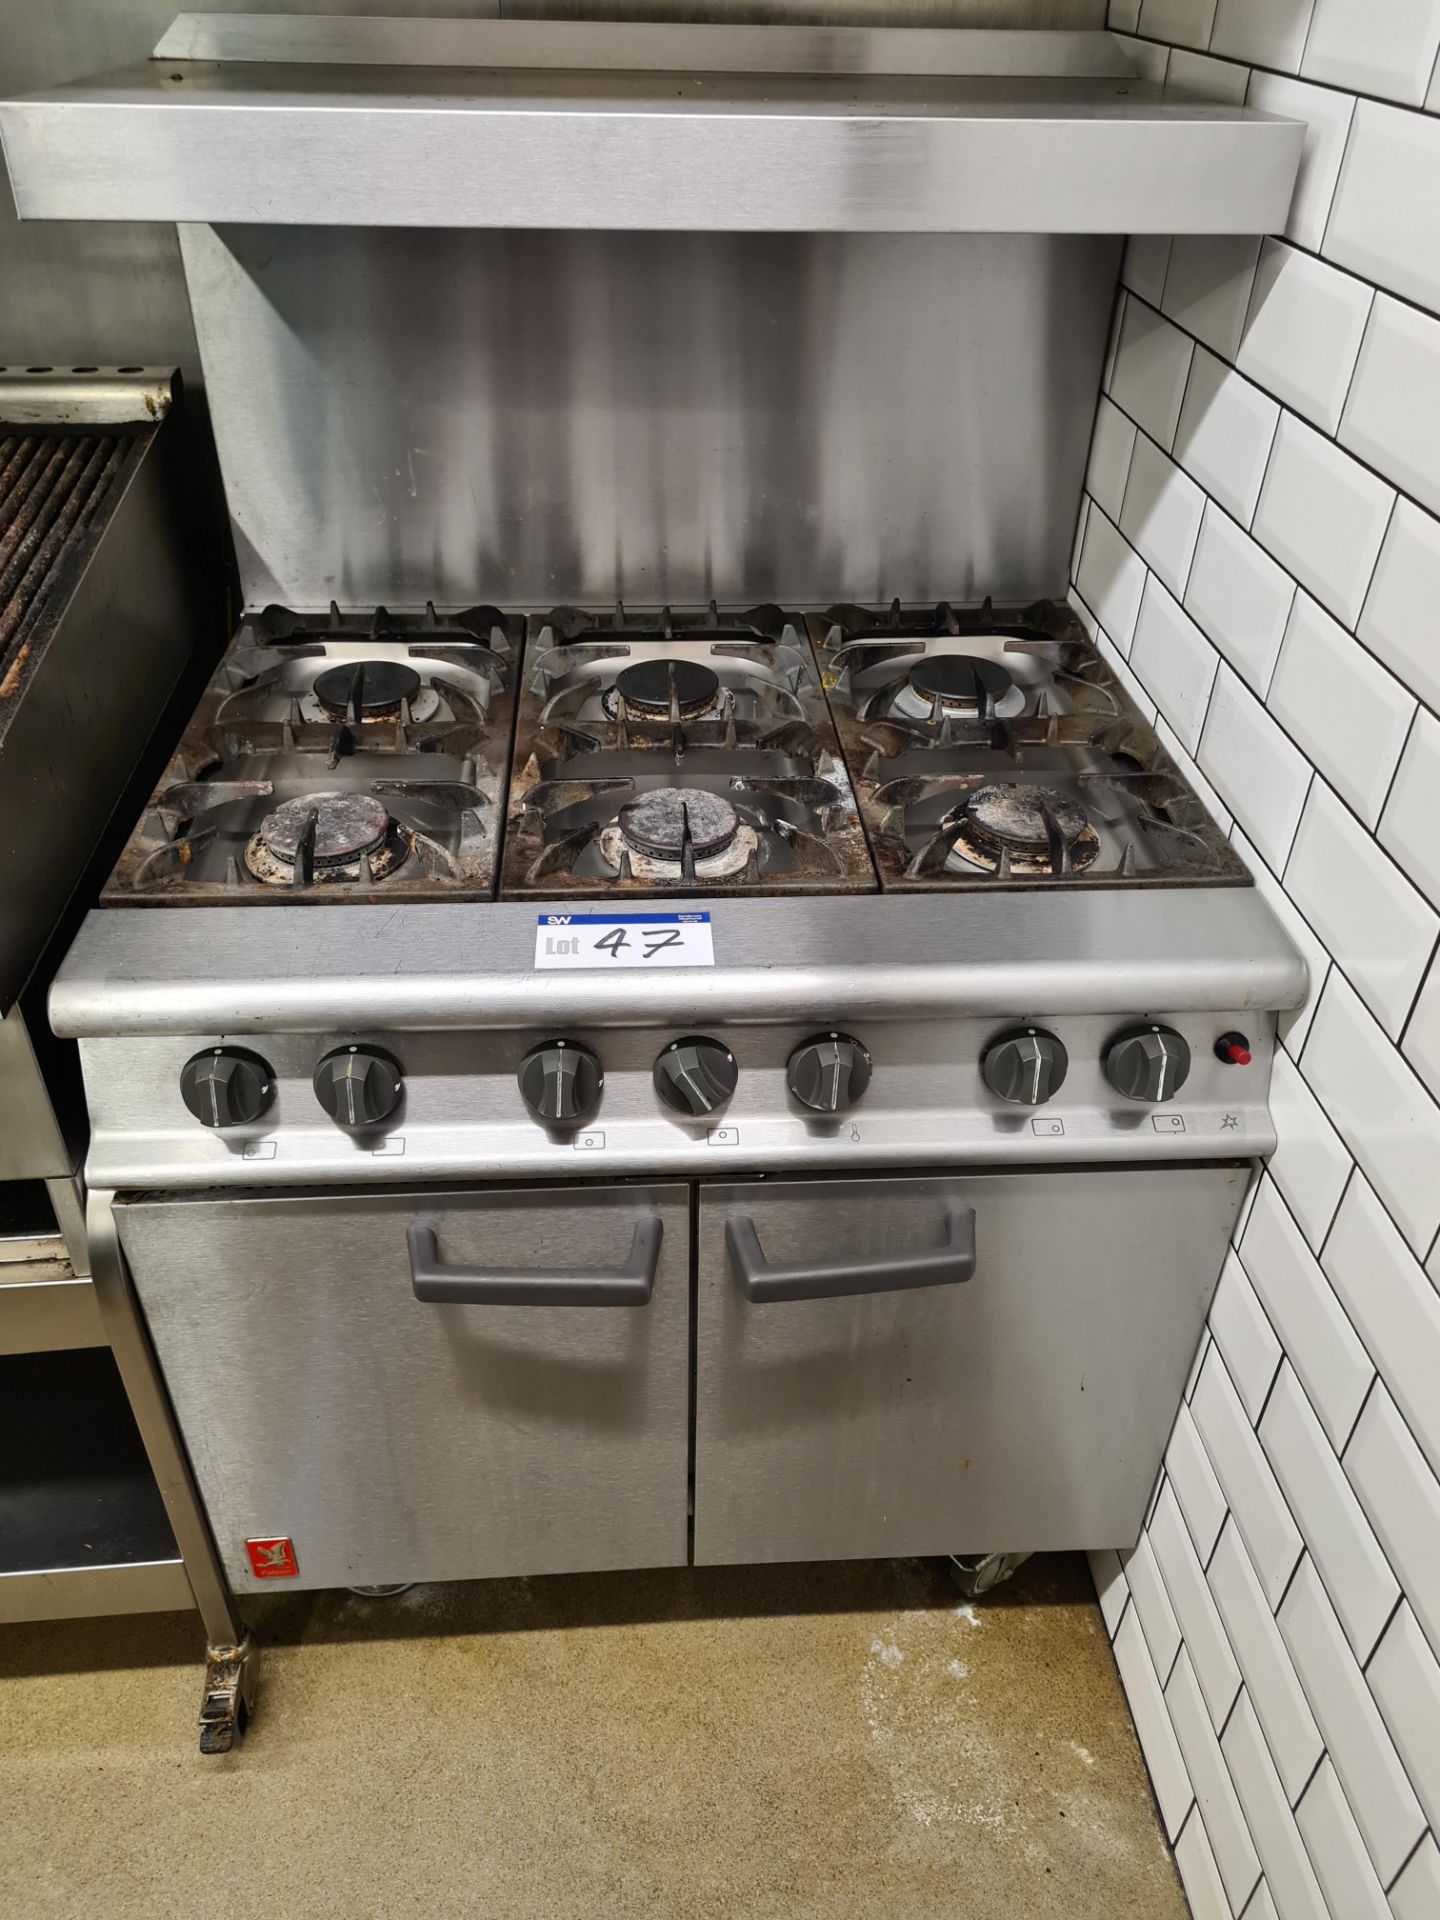 FALCON Stainless Steel Six Burner Range Cooker (Gas Needs Disconnecting and Capping) - Image 2 of 6